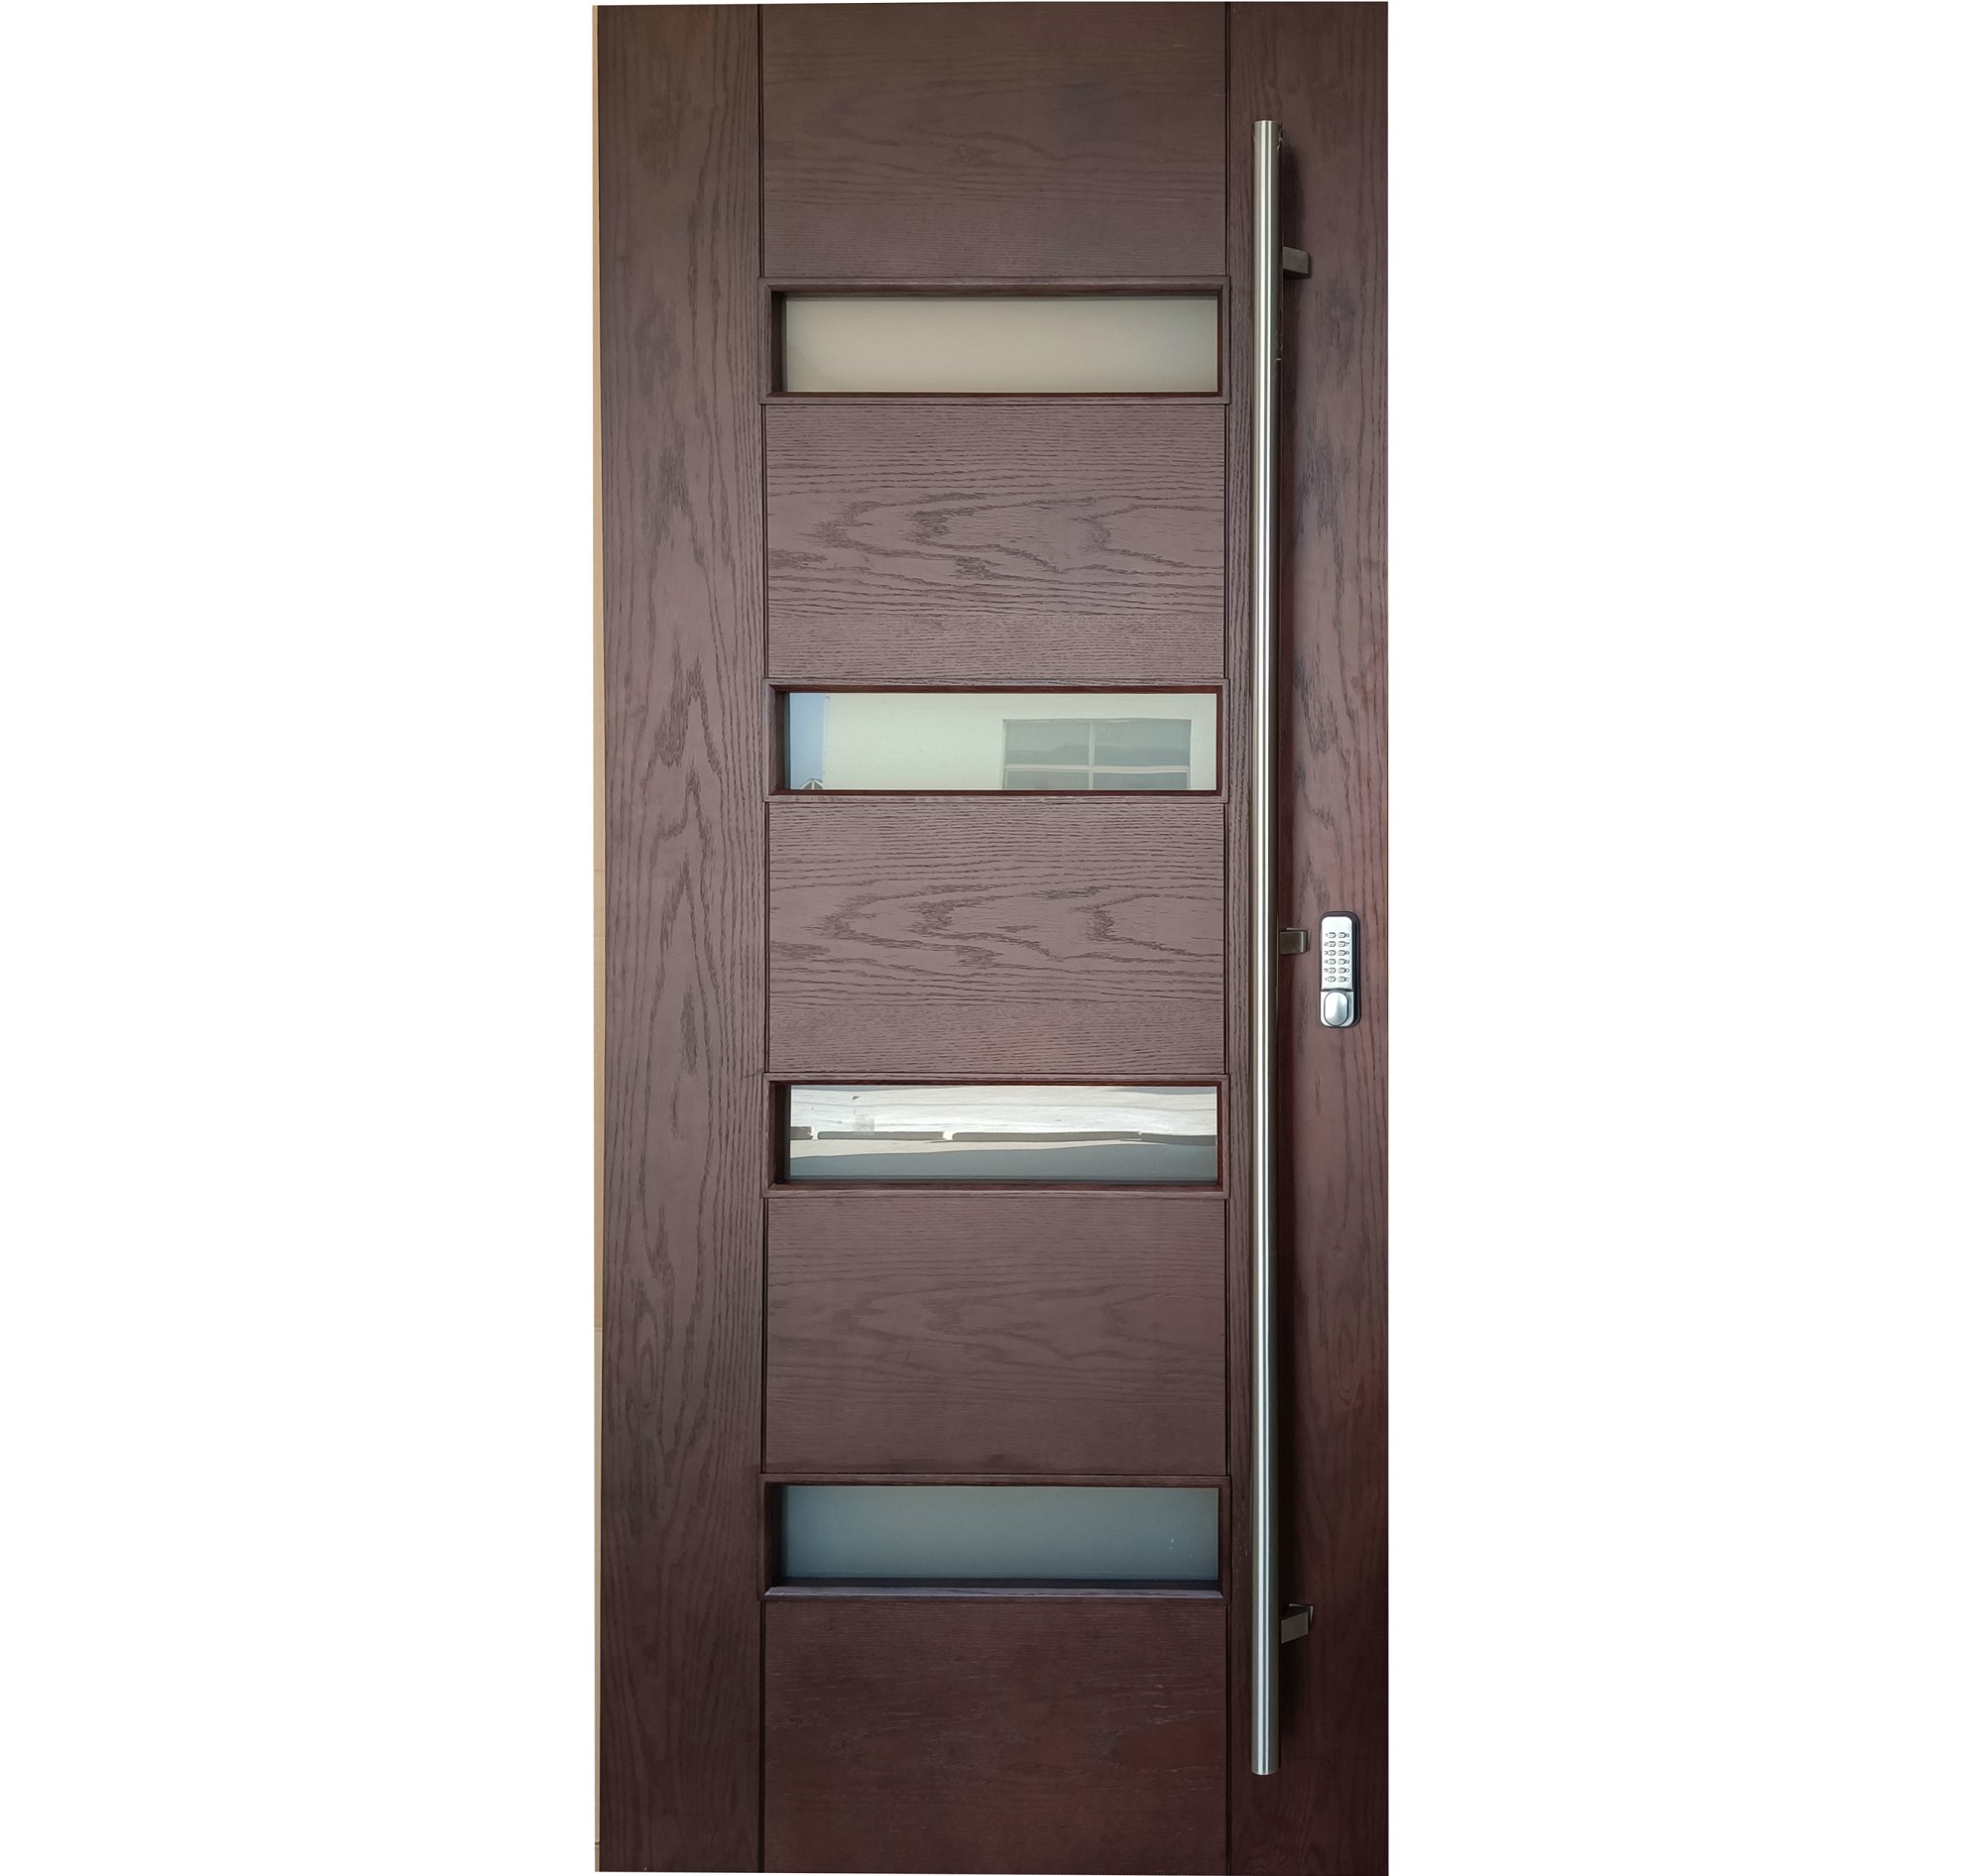 High Performance Garage Entry Door To House -
 Solid Oak Pivot Wooden Door with Glass  KD40A-G  – Kangton